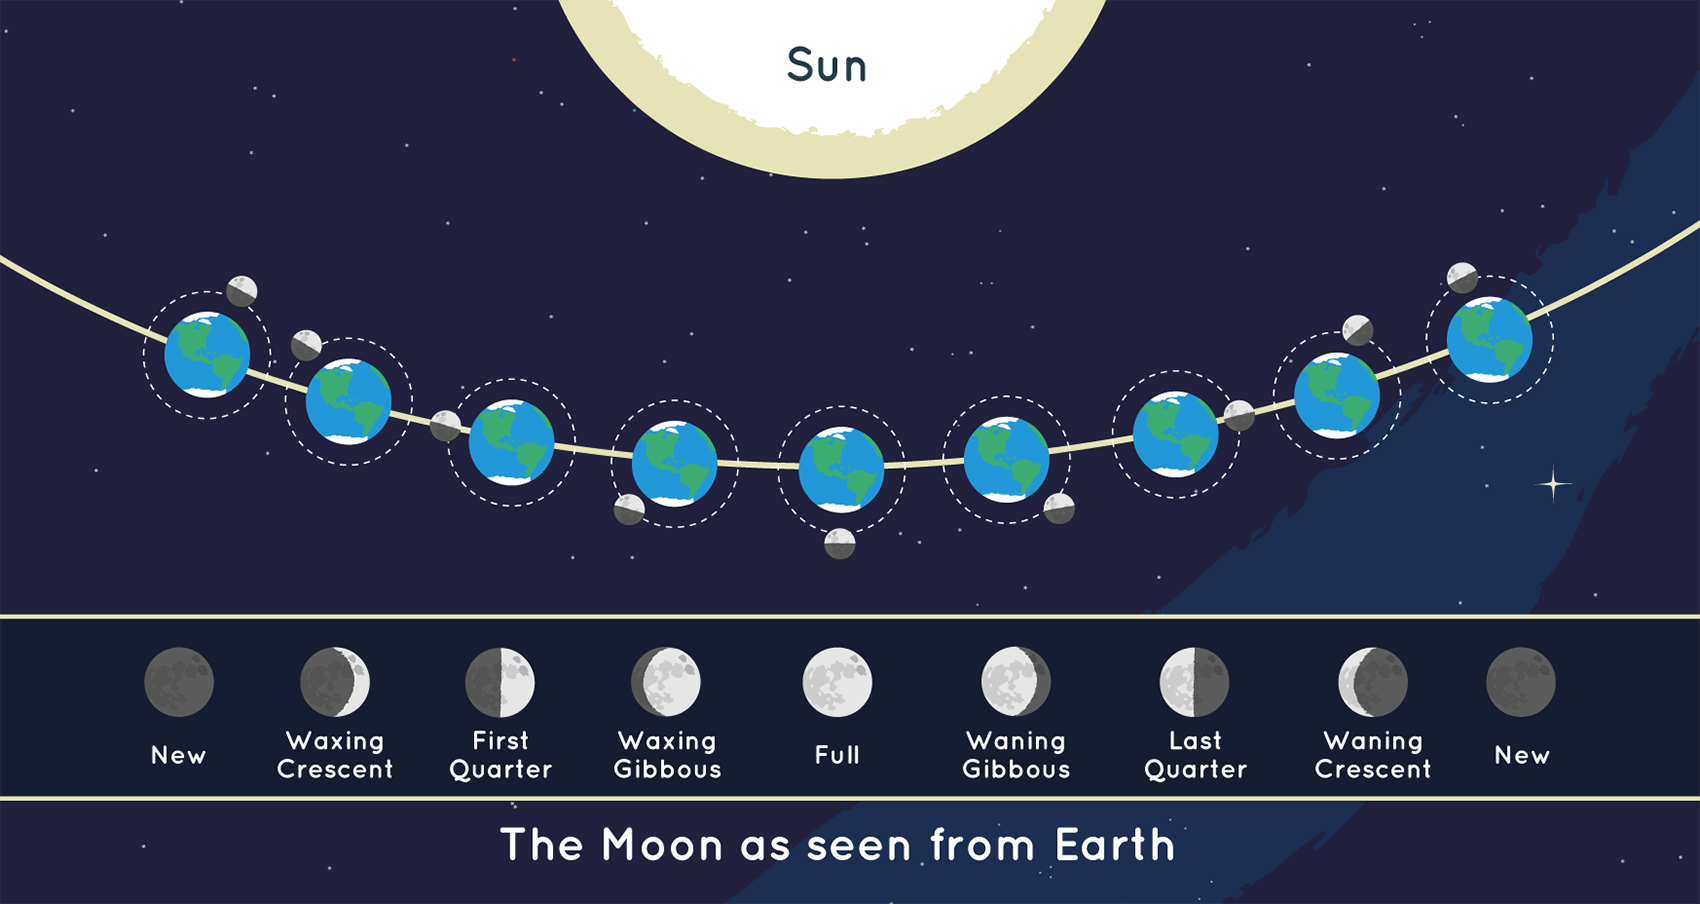 <p>the cycle of the amount of sunlight illuminated on the moon that is visible on Earth</p>